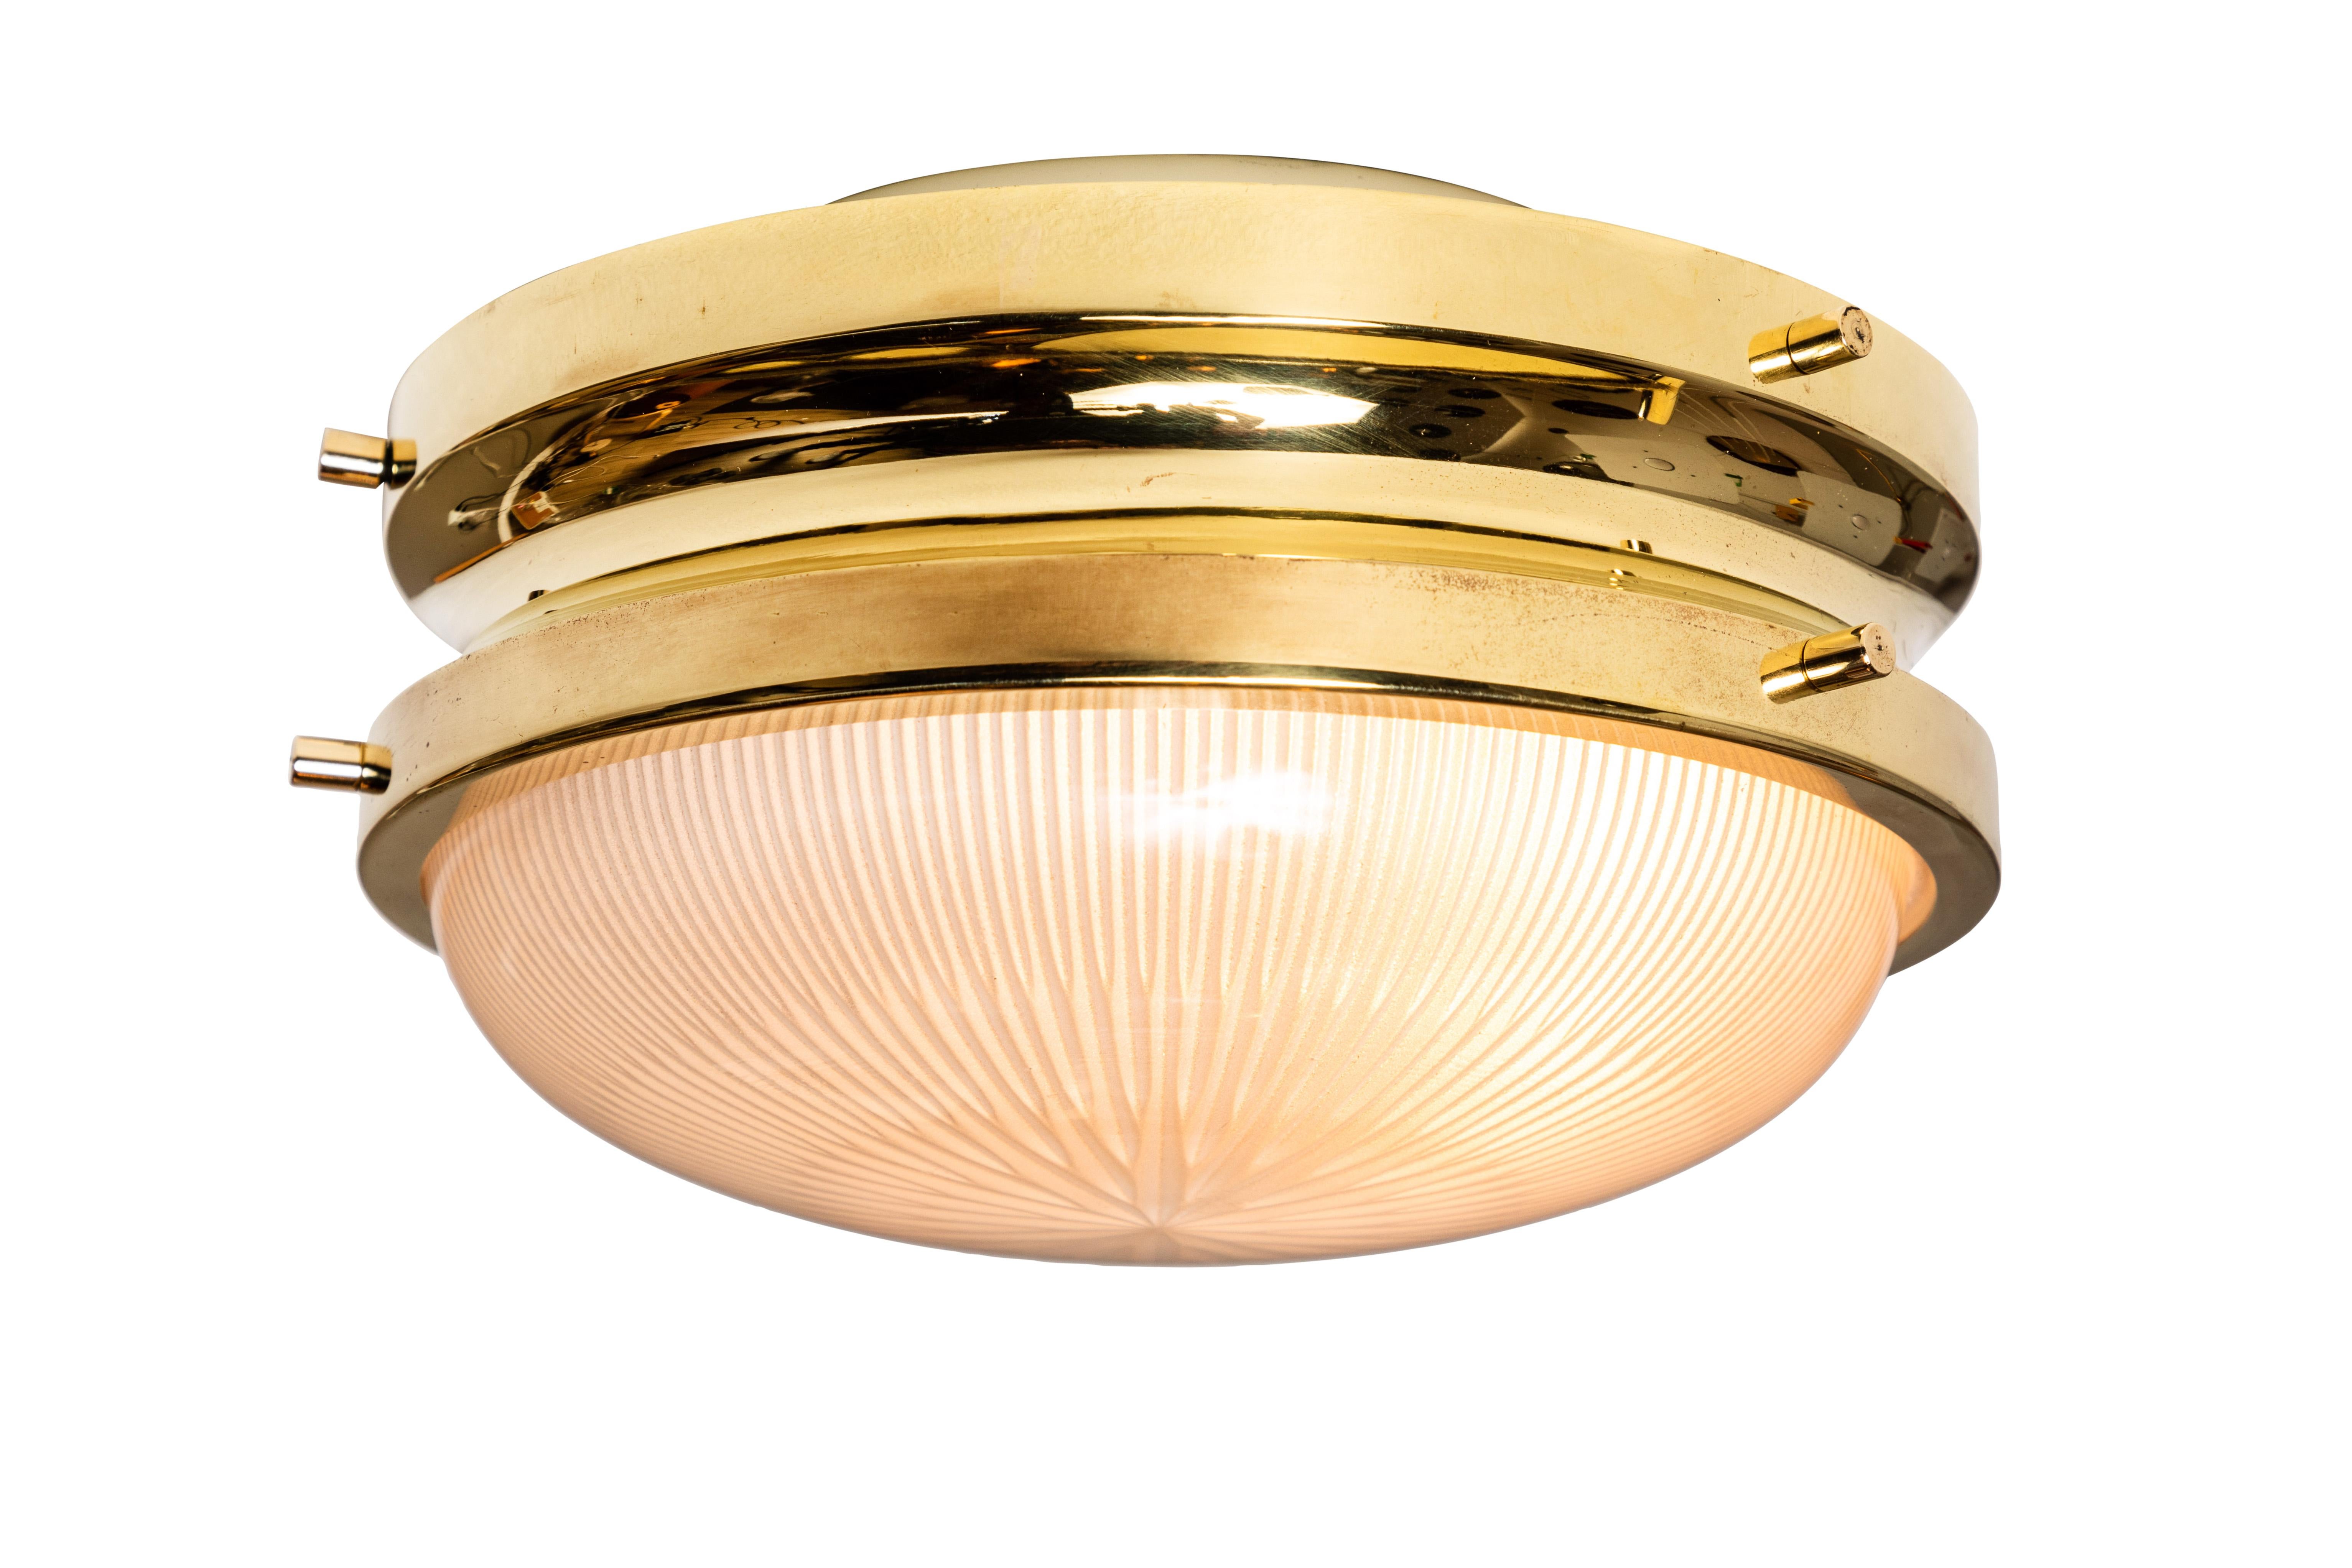 1960s Sergio Mazza Petite brass 'Sigma' wall or ceiling lights for Artemide. Executed in polished brass and pressed opaline glass. Professionally rewired for US electrical, accommodates a single 40 watt max incandescent candelabra bulb or higher